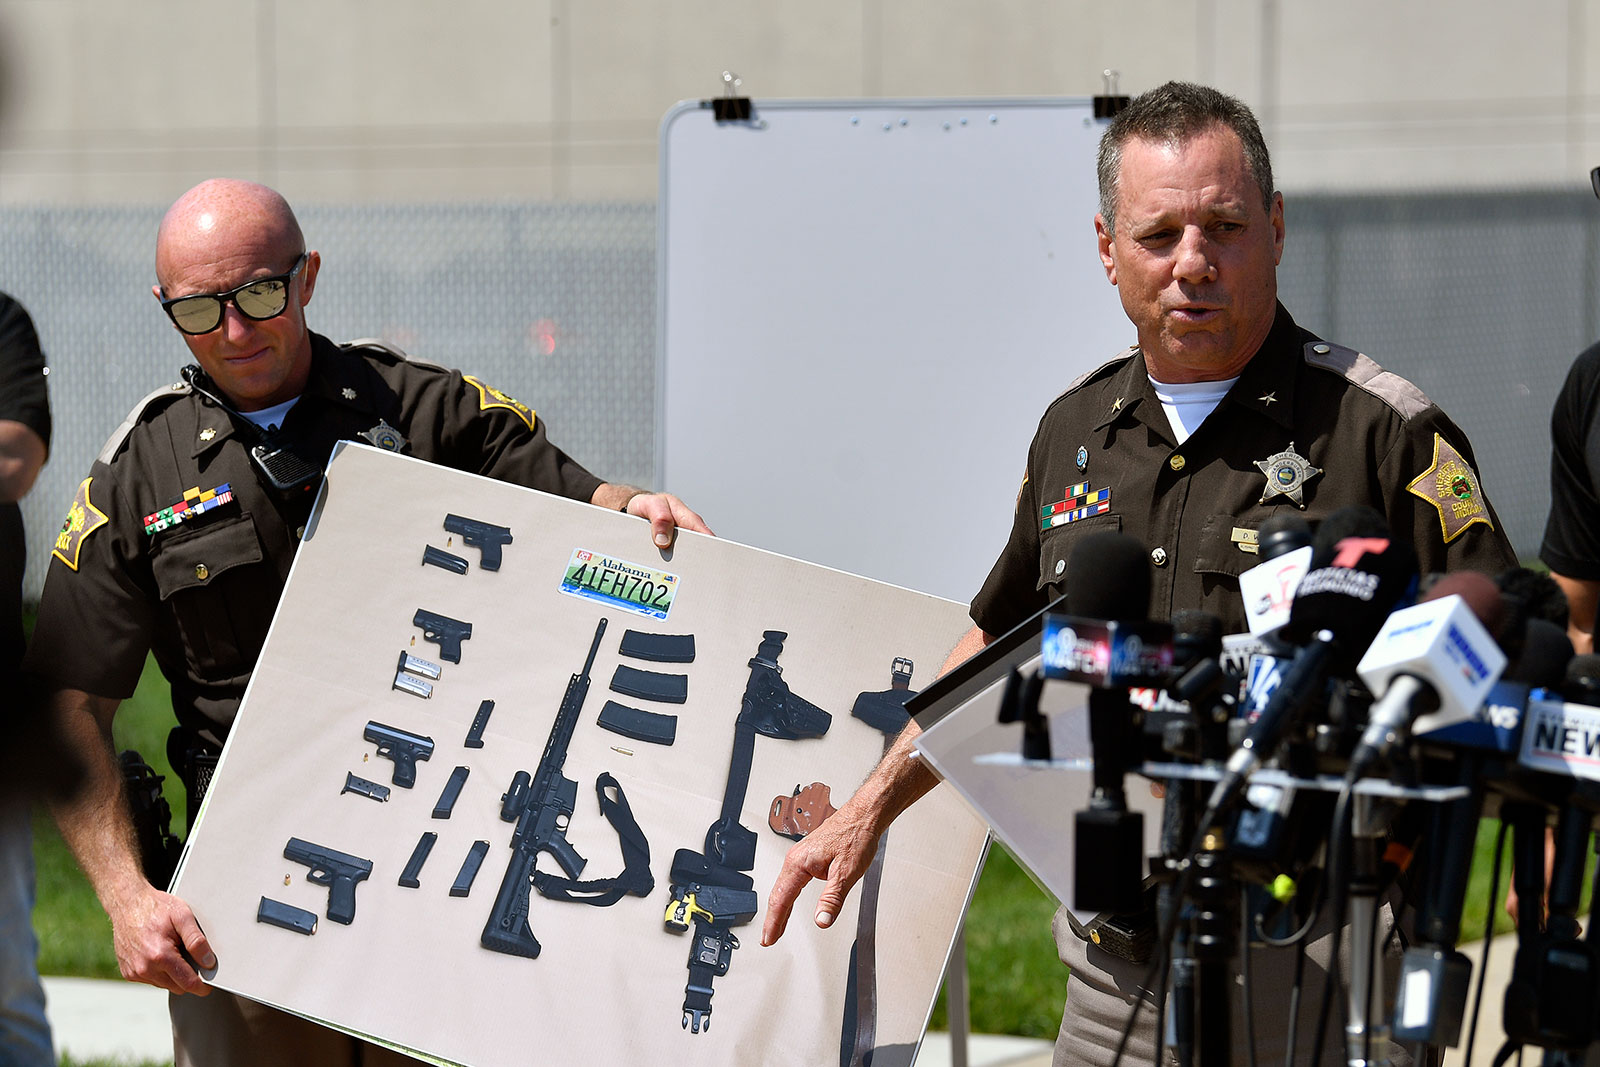 Vanderburgh County Sheriff Dave Wedding shows a photograph of the weapons that were found in the possession of fugitives Casey White and Vicky White following their capture during a press conference in Evansville, Indiana,  May 10.